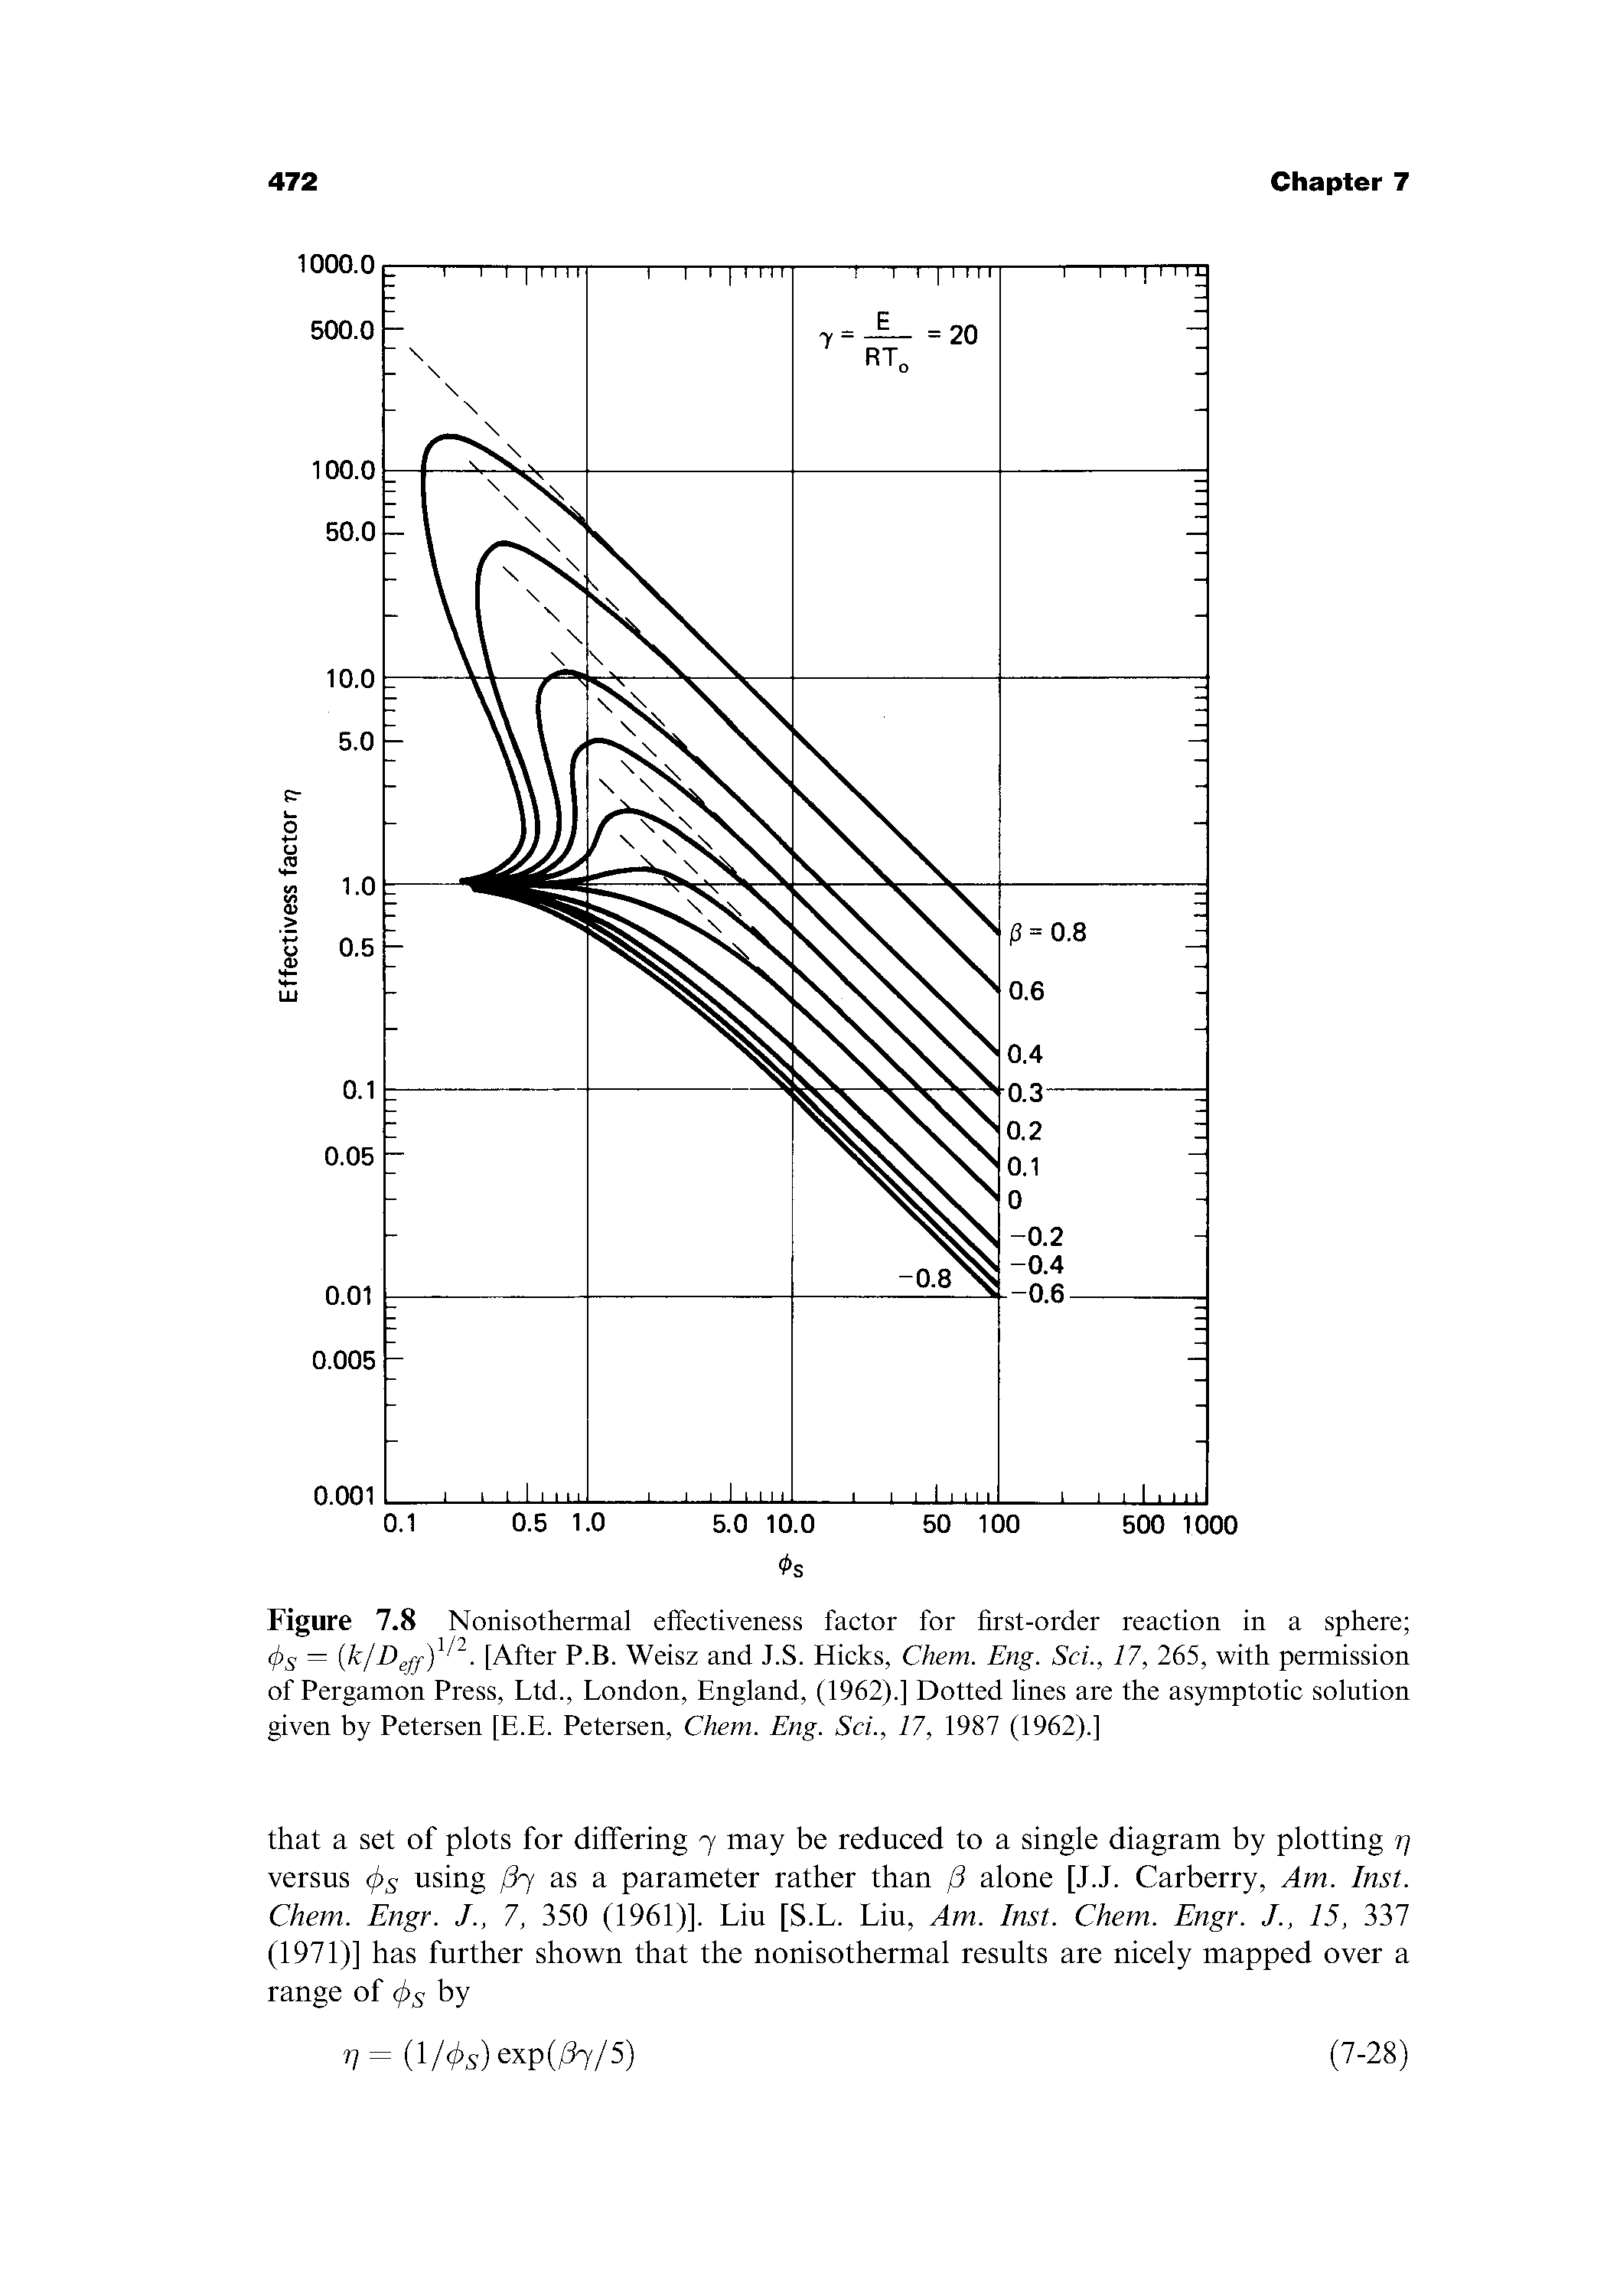 Figure 7.8 Nonisothermal effectiveness factor for first-order reaction in a sphere Ps — k/ [After P.B. Weisz and J.S. Hicks, Chem. Eng. Sci., 17, 265, with permission of Pergamon Press, Ltd., London, England, (1962).] Dotted lines are the asymptotic solution given by Petersen [E.E. Petersen, Chem. Eng. Sci., 17, 1987 (1962).]...